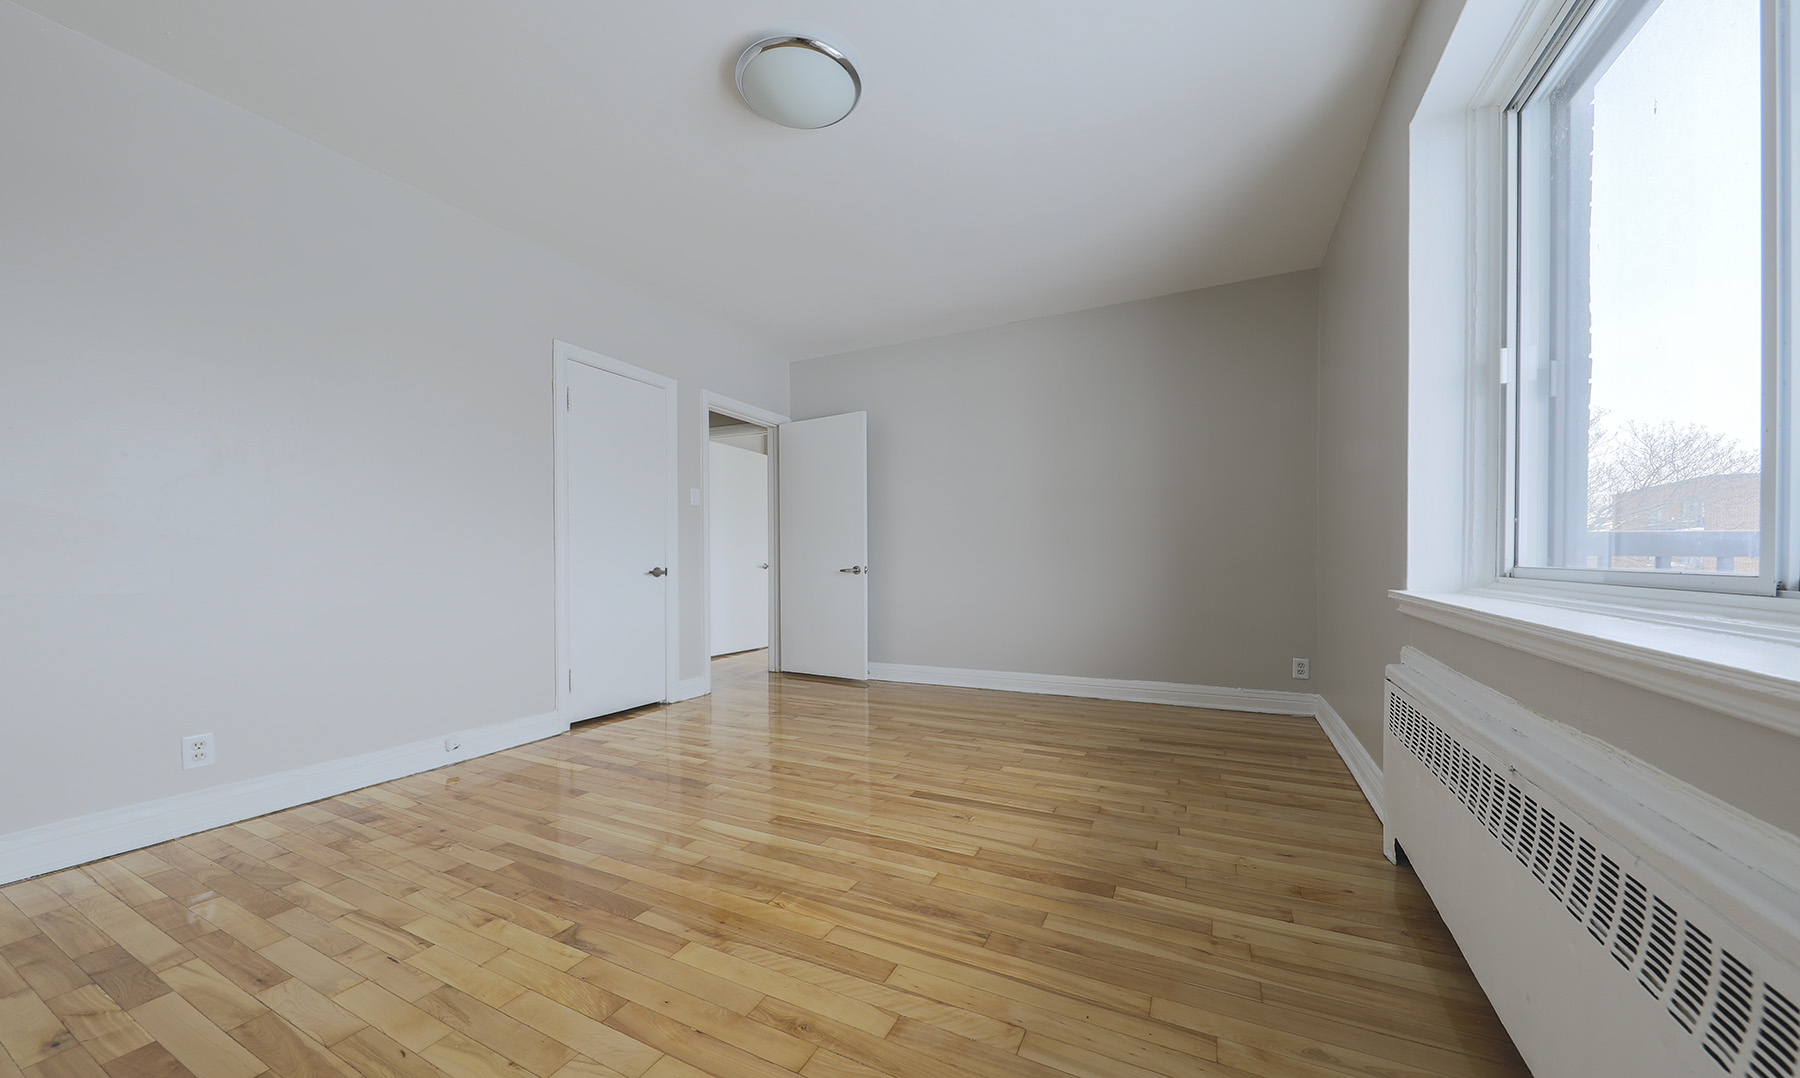 2 bedroom Apartments for rent in Notre-Dame-de-Grace at 6325 Somerled - Photo 07 - RentQuebecApartments – L401540